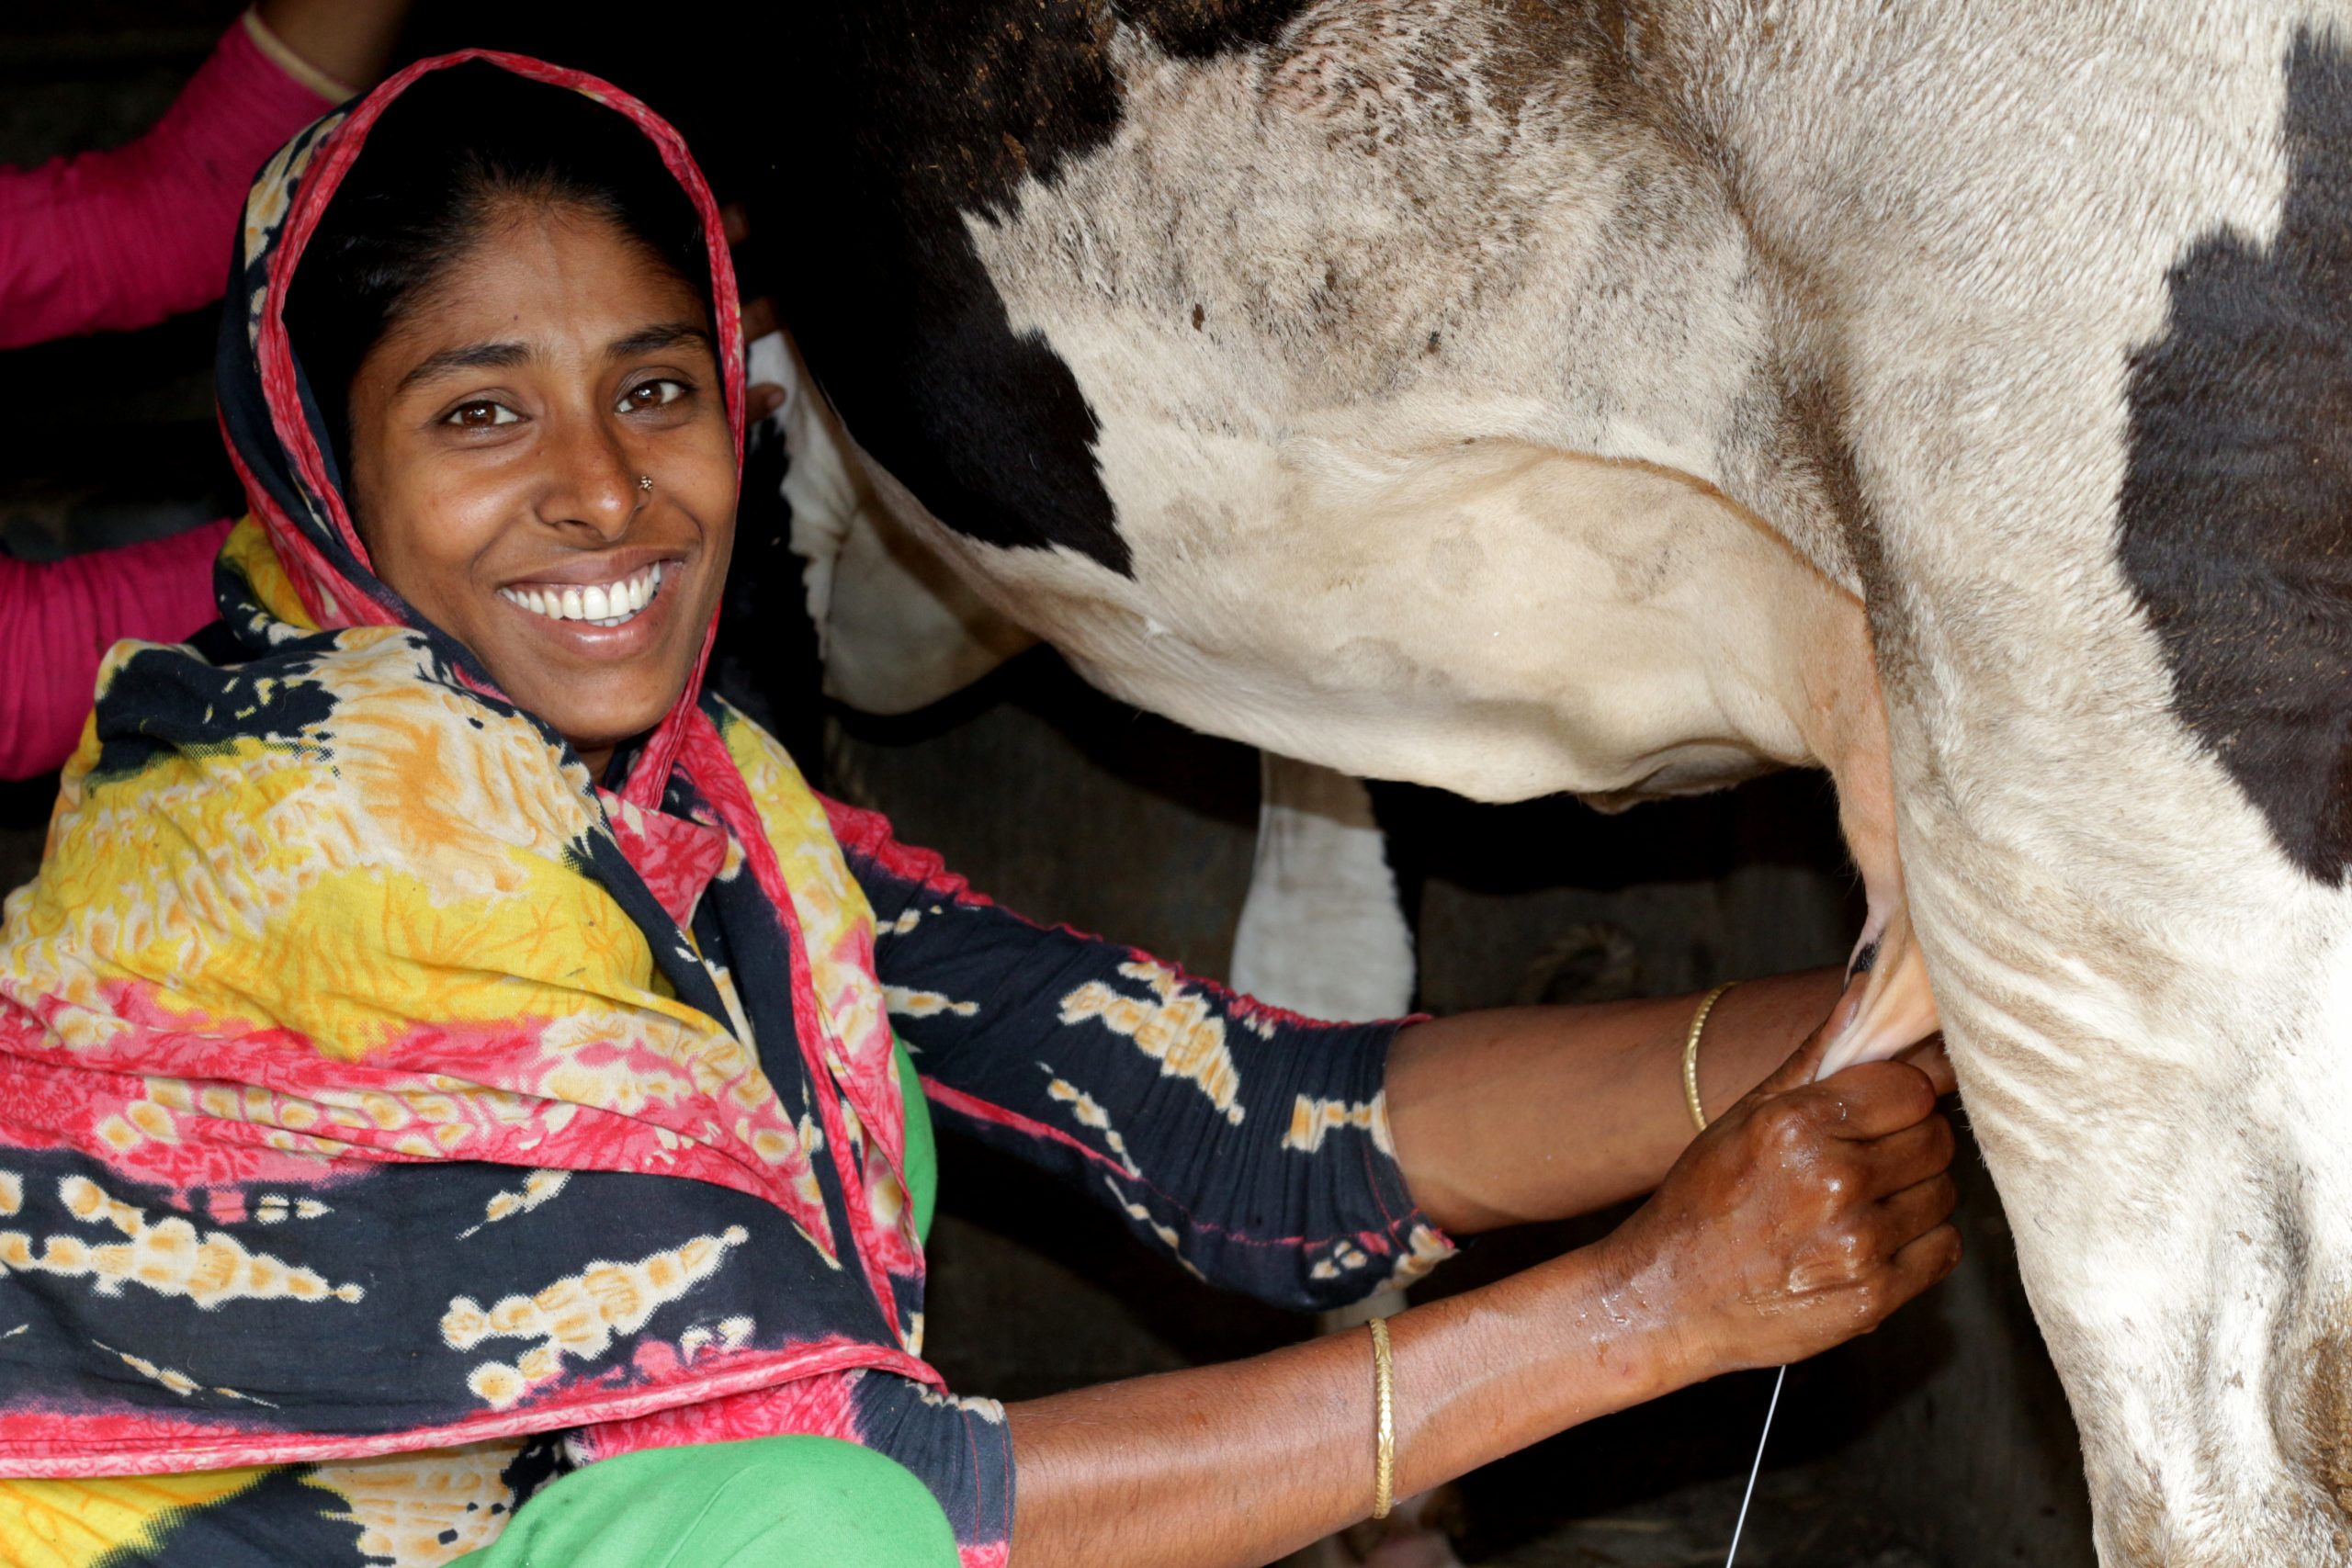 Publication – Household dairy production, dairy intake, and anthropometric outcomes in rural Bangladesh